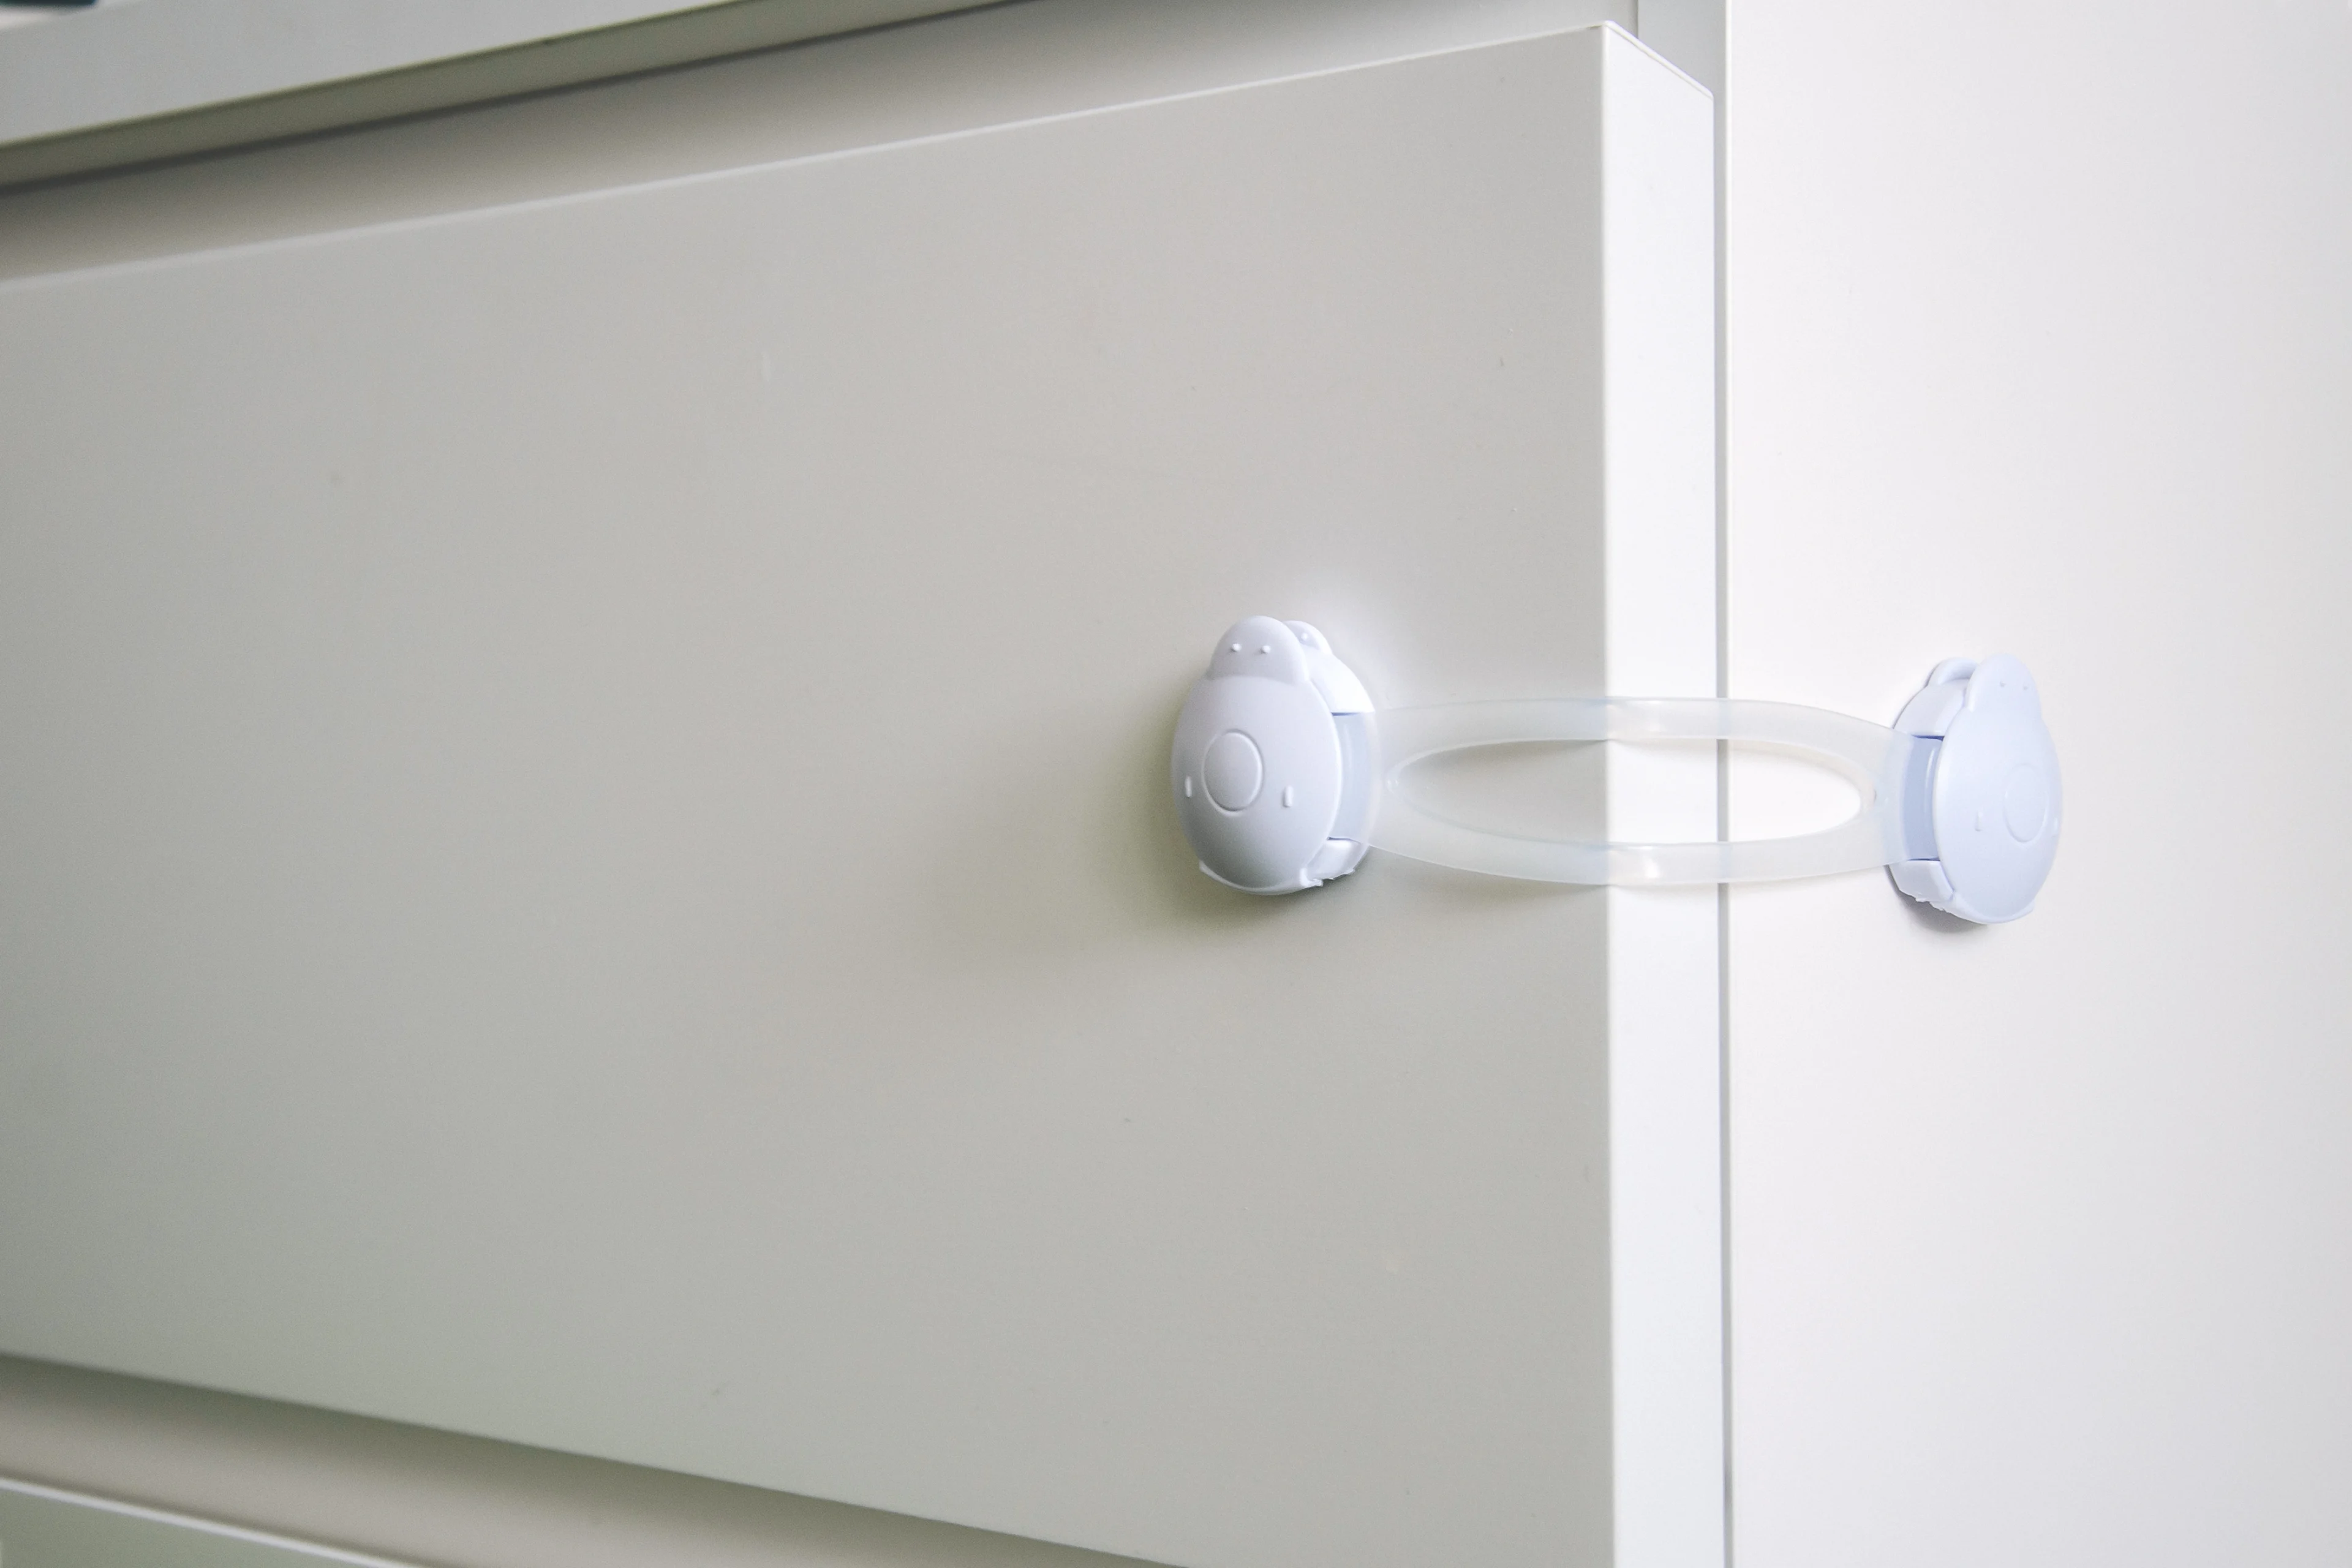 a picture of a drawer secured with a child-proof locking device